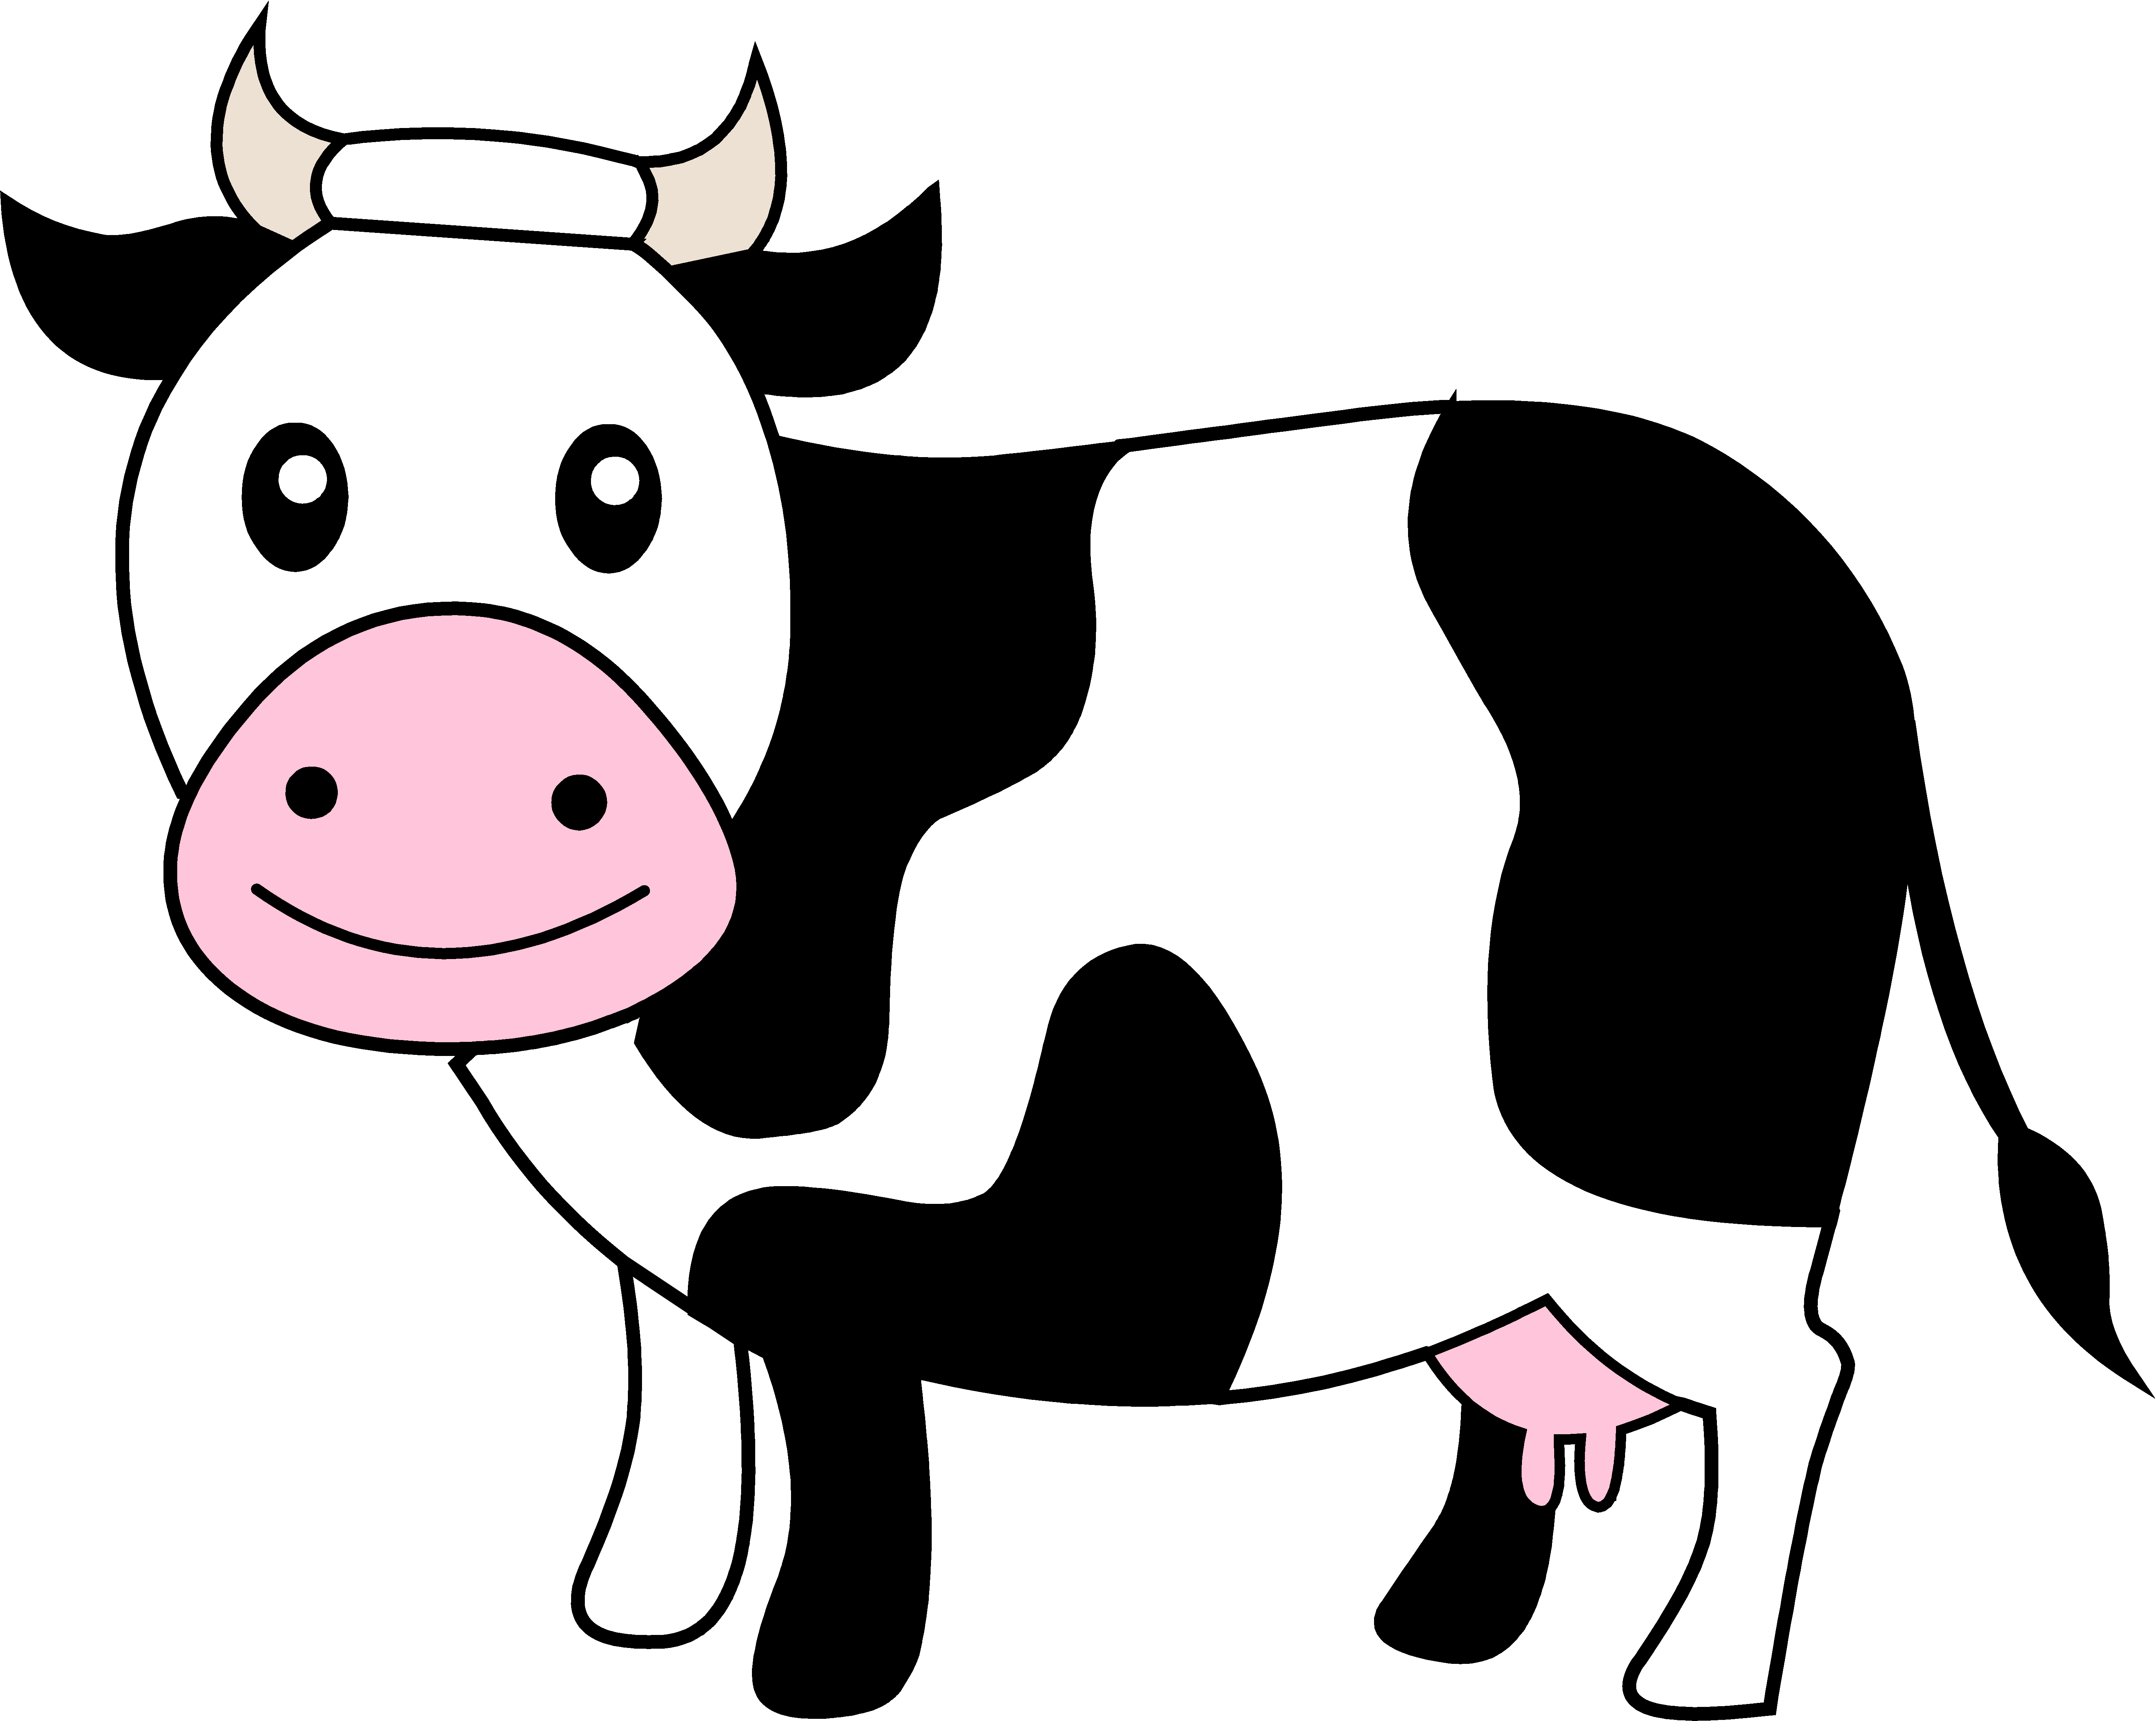 Free to Use Public Domain Cow